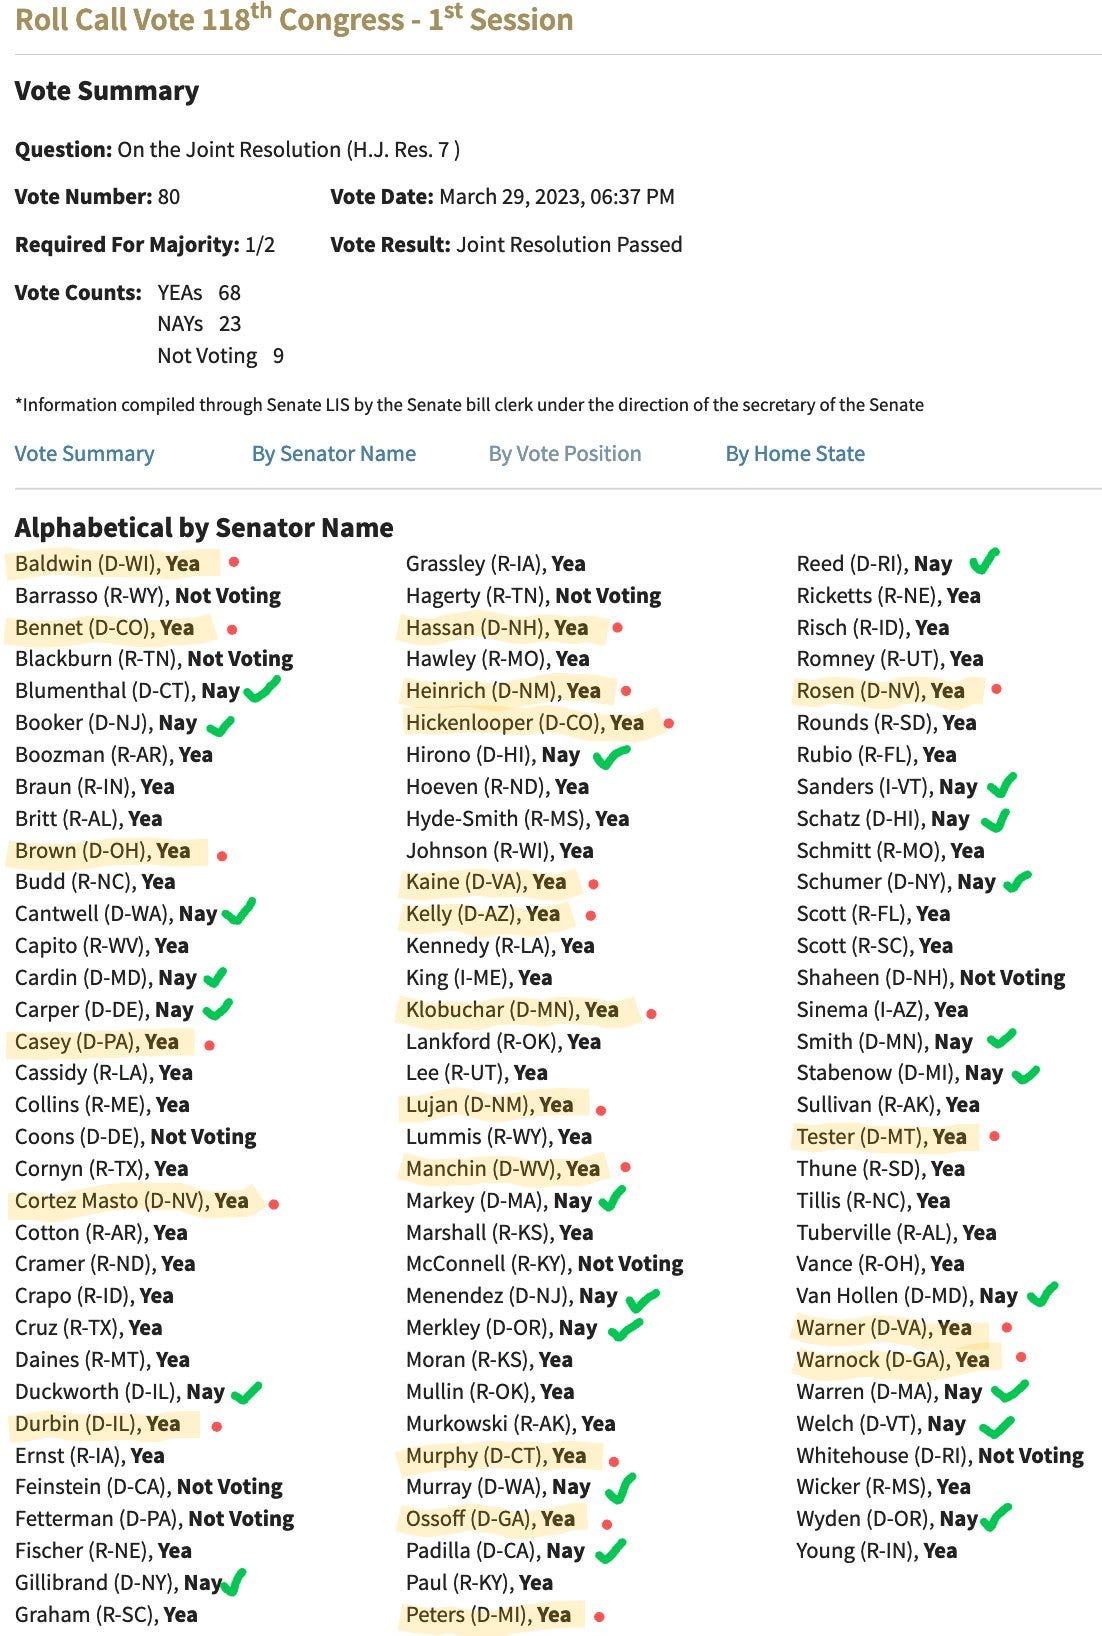 Image highlights the dems who voted yea or nay to end national emergency. 118th CongressH.J. Res. 7 March 29, 2023, YEAs 68 NAYs 23 Not Voting 9 Baldwin (D-WI), Yea Bennet (D-CO), Yea Blumenthal (D-CT), Nay Booker (D-NJ), Nay Brown (D-OH), Yea Cantwell (D-WA), Nay Cardin (D-MD), Nay Carper (D-DE), Nay Casey (D-PA), Yea Cortez Masto (D-NV), Yea Duckworth (D-IL), Nay Durbin (D-IL), Yea Gillibrand (D-NY), Nay Hassan (D-NH), Yea Heinrich (D-NM), Yea Hickenlooper (D-CO), Yea Hirono (D-HI), Nay Kaine (D-VA), Yea Kelly (D-AZ), Yea Klobuchar (D-MN), Yea Lujan (D-NM), Yea Manchin (D-WV), Yea Markey (D-MA), Nay Menendez (D-NJ), Nay Merkley (D-OR), Nay Murphy (D-CT), Yea Murray (D-WA), Nay Ossoff (D-GA), Yea Padilla (D-CA), Nay Peters (D-MI), Yea Reed (D-RI), Nay Rosen (D-NV), Yea Schatz (D-HI), Nay Schumer (D-NY), Nay Smith (D-MN), Nay Stabenow (D-MI), Nay Tester (D-MT), Yea Van Hollen (D-MD), Nay Warner (D-VA), Yea Warnock (D-GA), Yea Warren (D-MA), Nay Welch (D-VT), Nay Wyden (D-OR), Nay